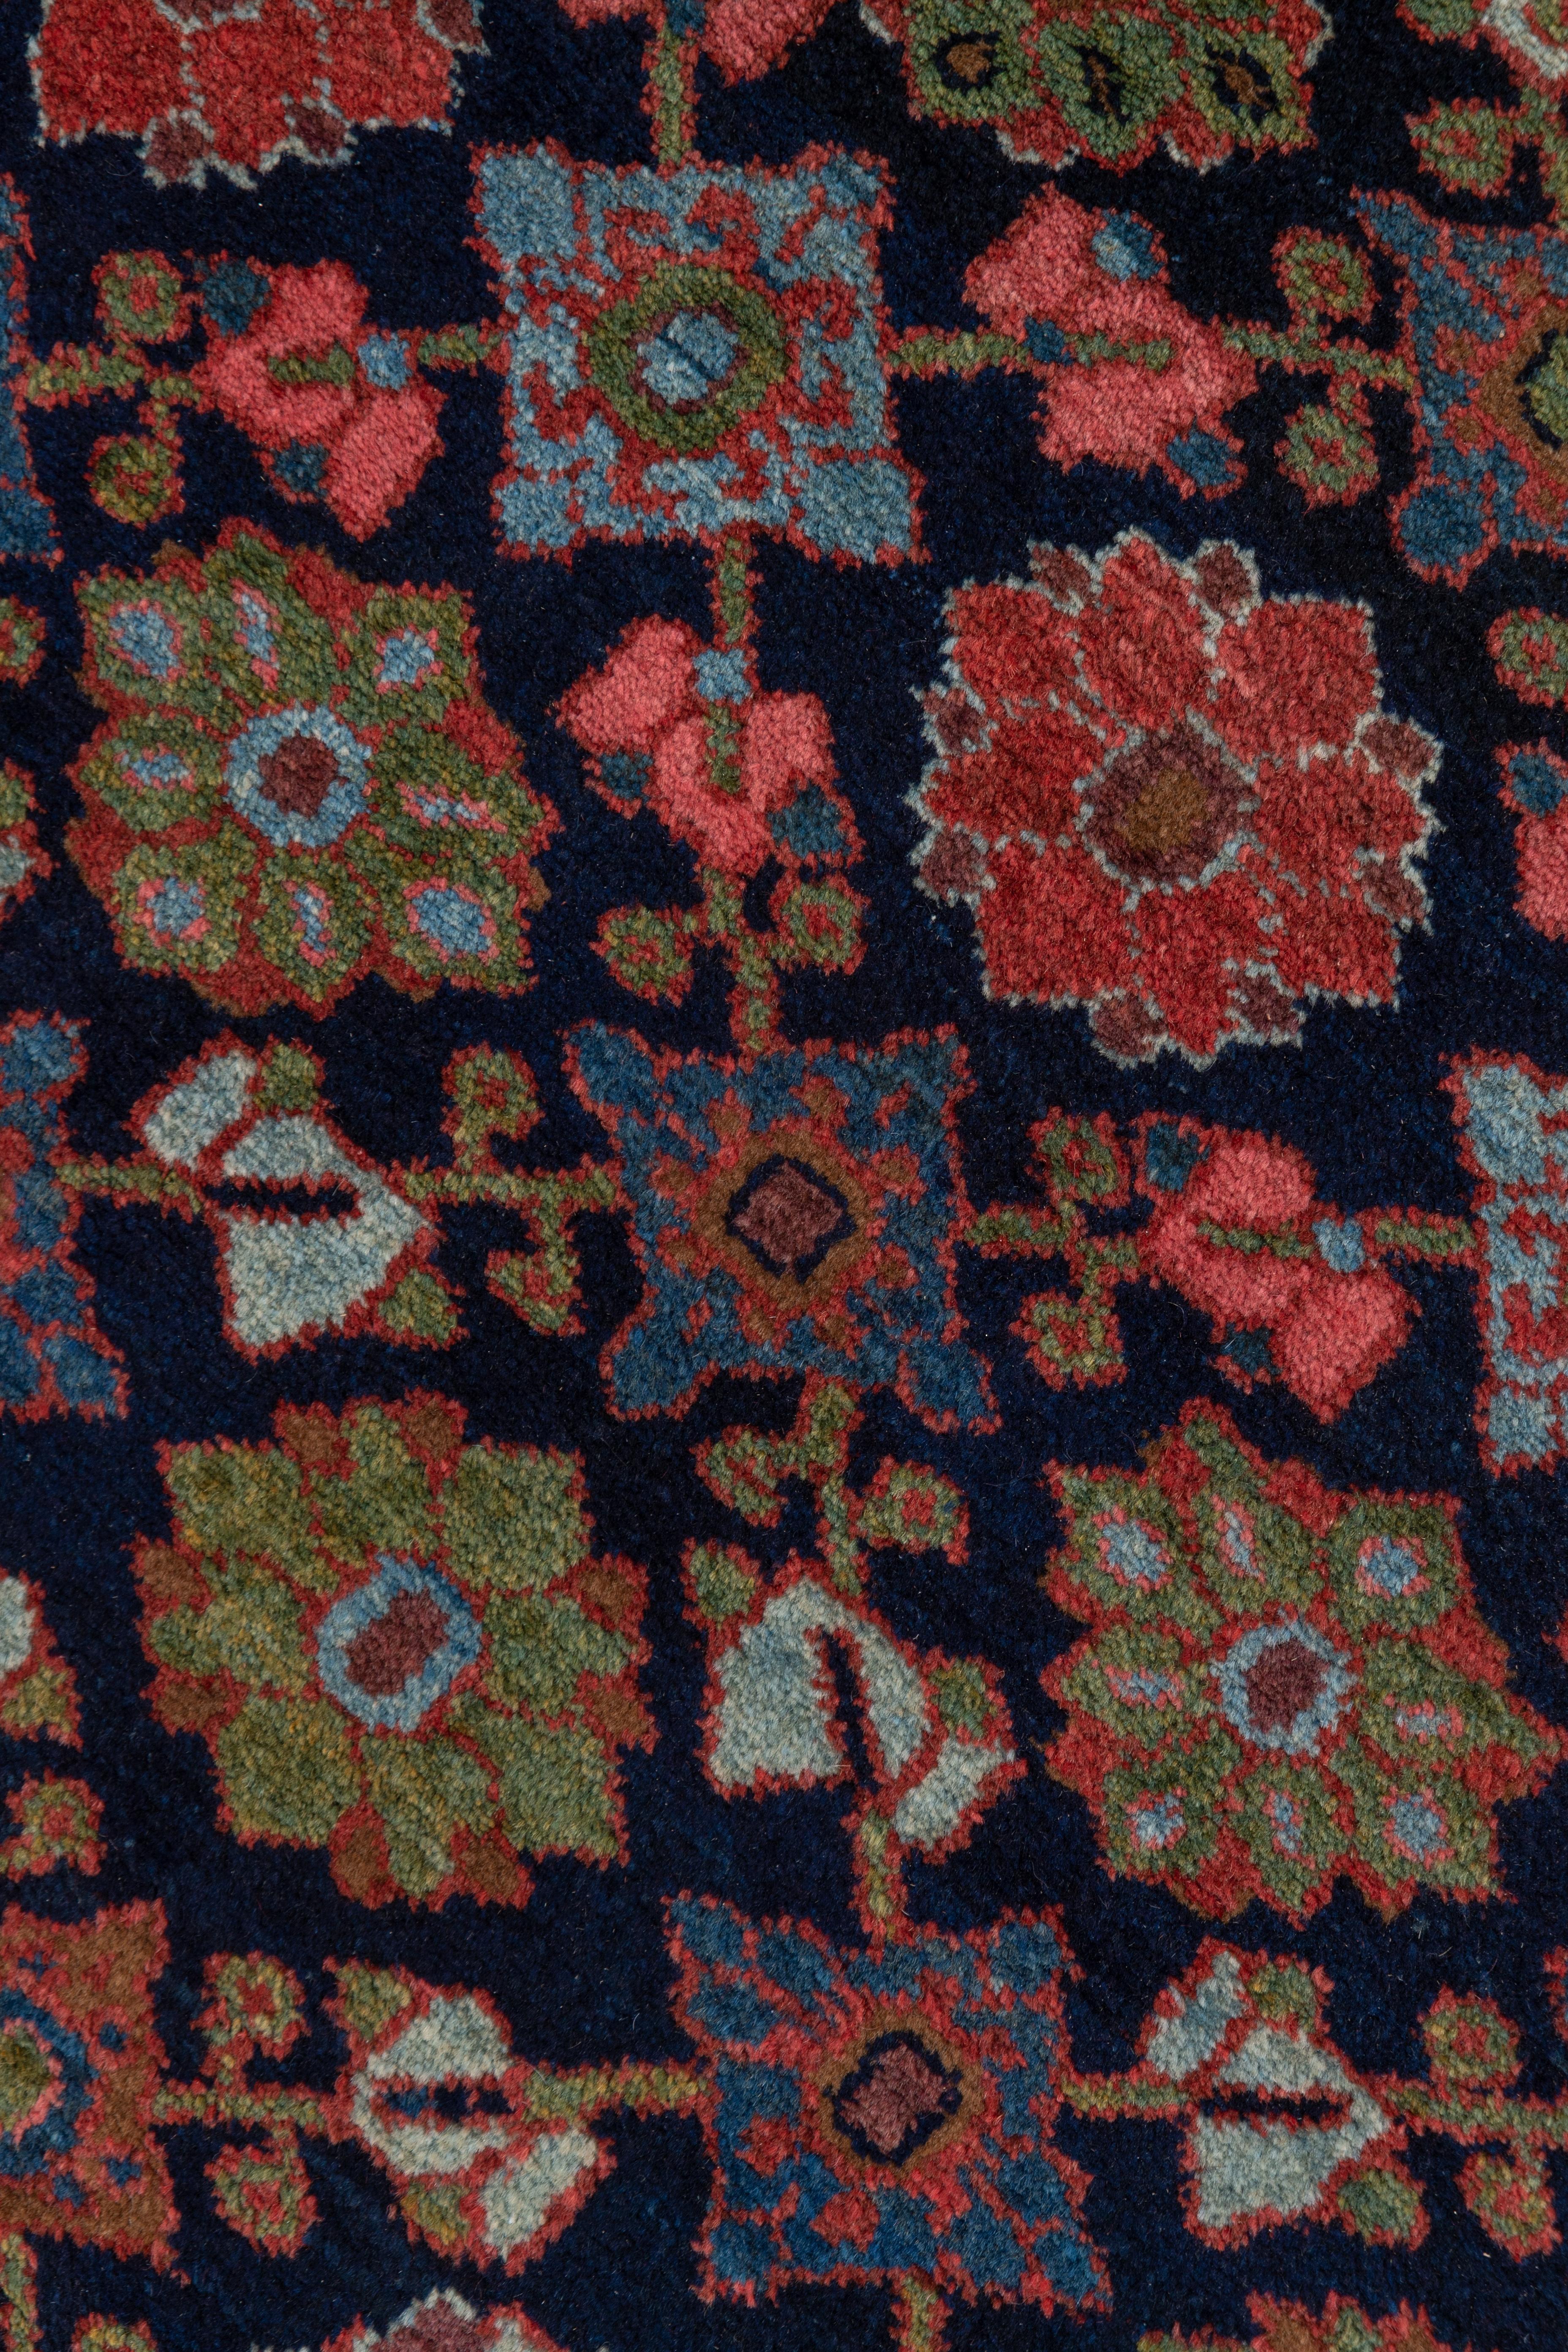 This top condition west Persian rustic runner has a navy field with a formal, geometric version of the Mina Khani rosette trellis design detailed in medium blue, light blue, rose , ecru and green. The main border shows an angular vine and fish bone